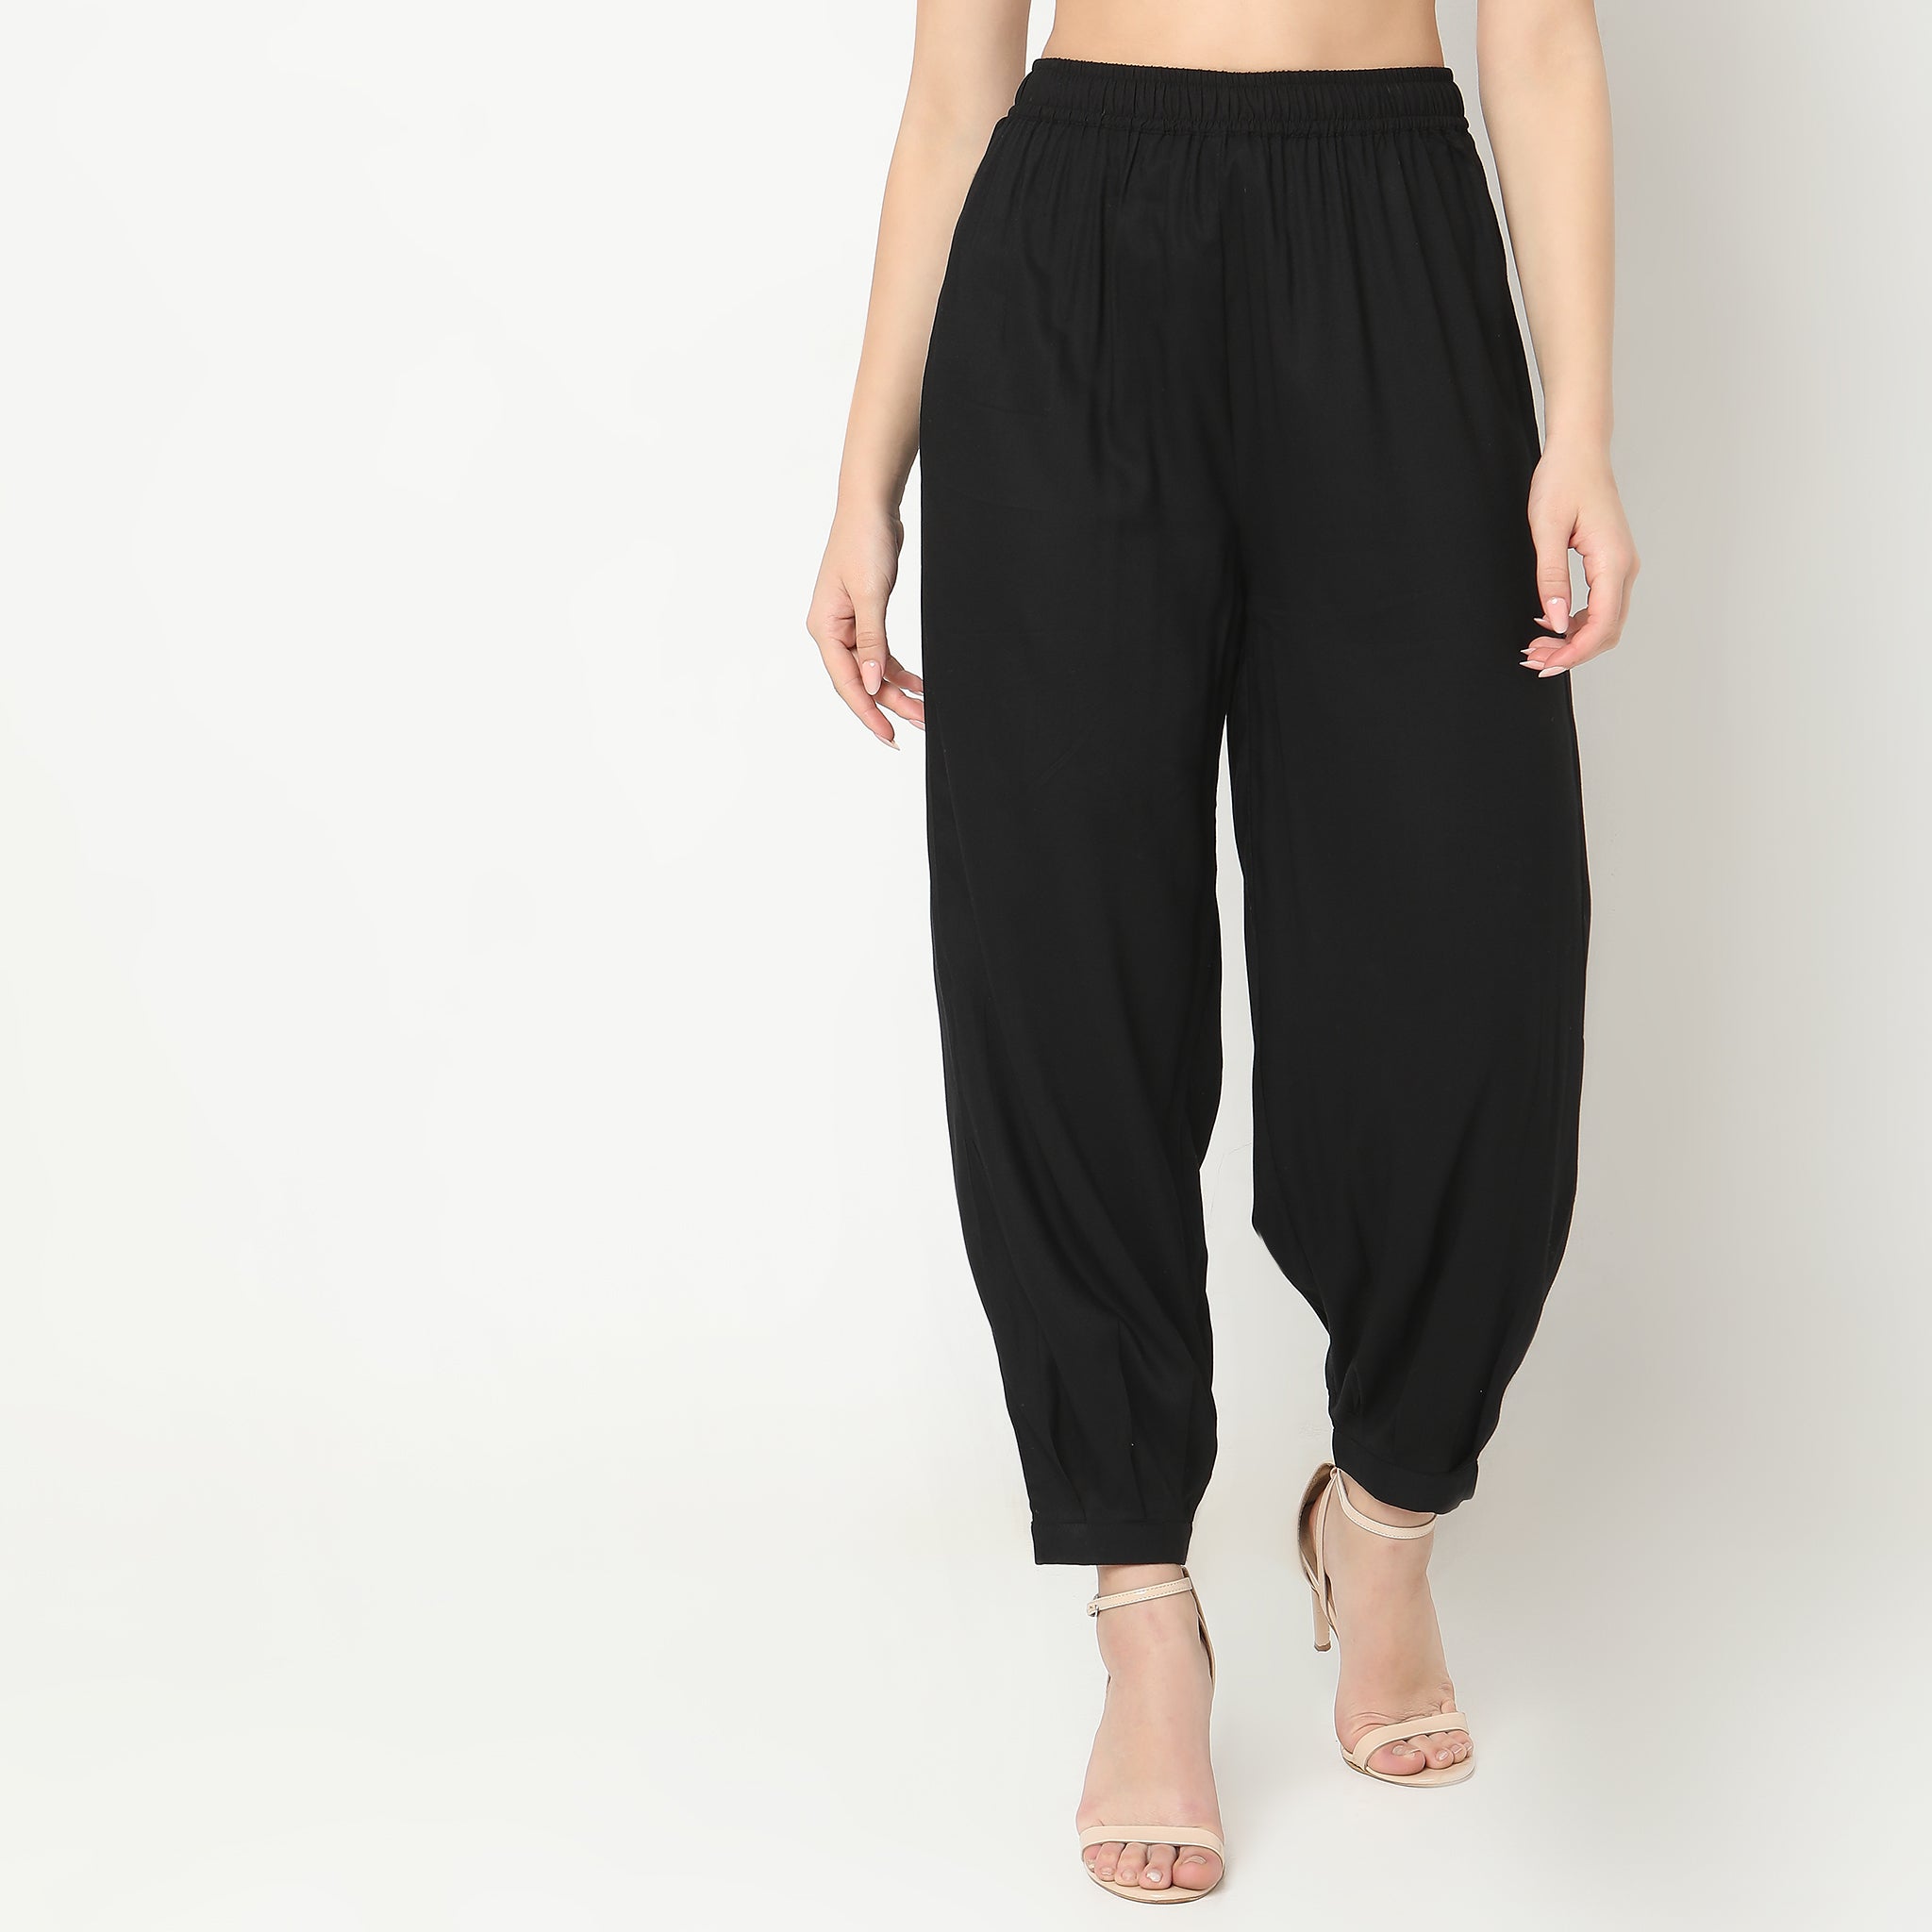 Pants For Women - Buy Track Pants Women Online in India - Style Union